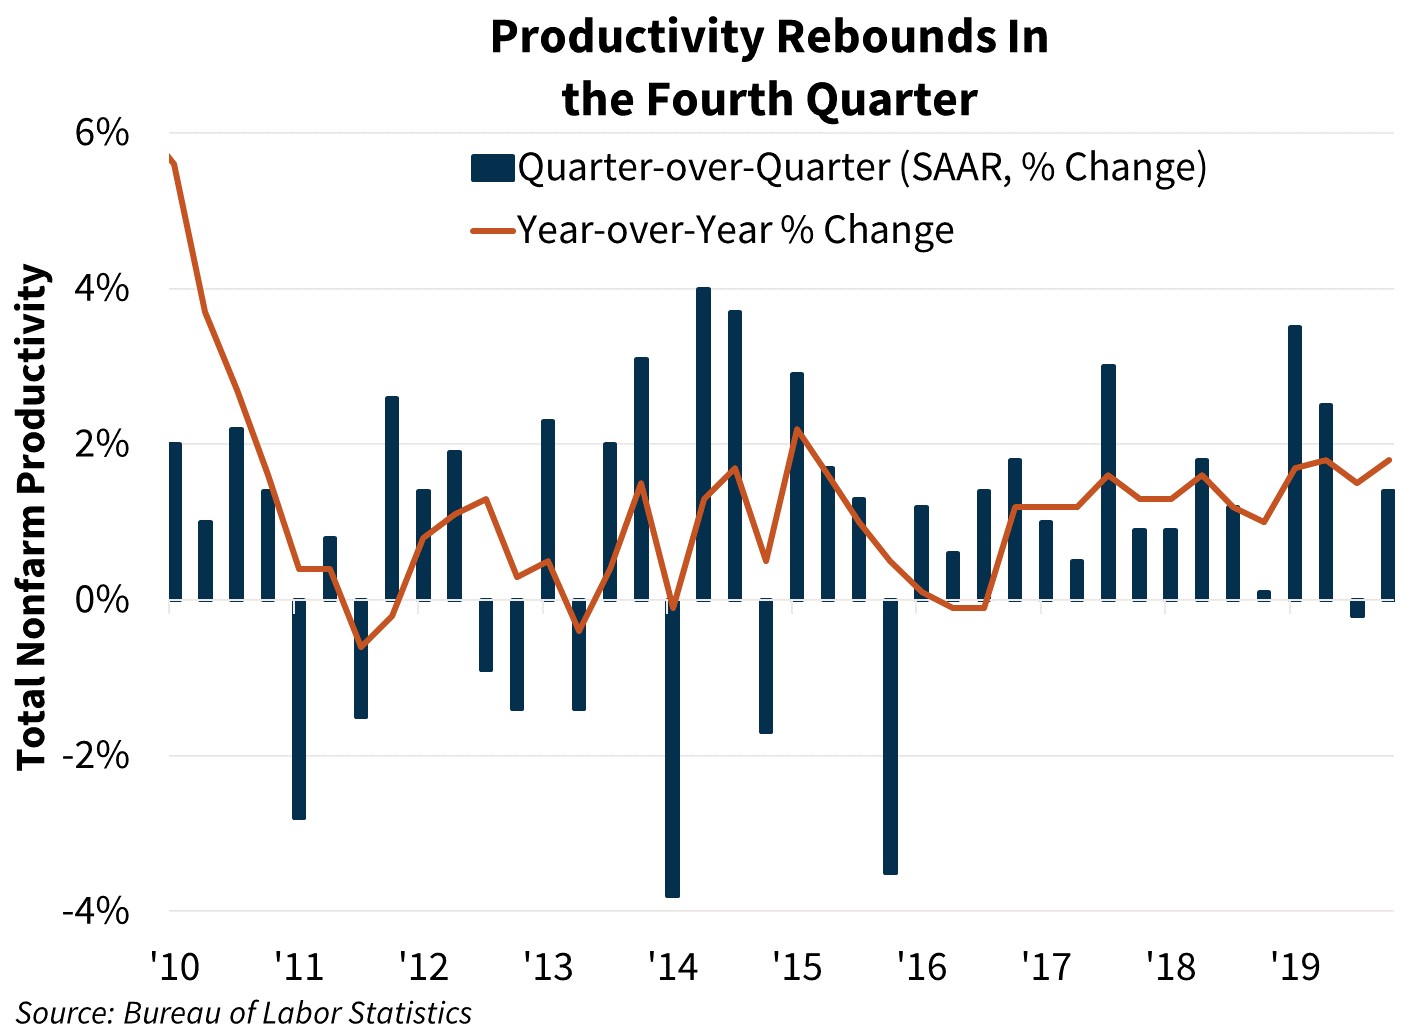 Productivity Rebounds In the Fourth Quarter